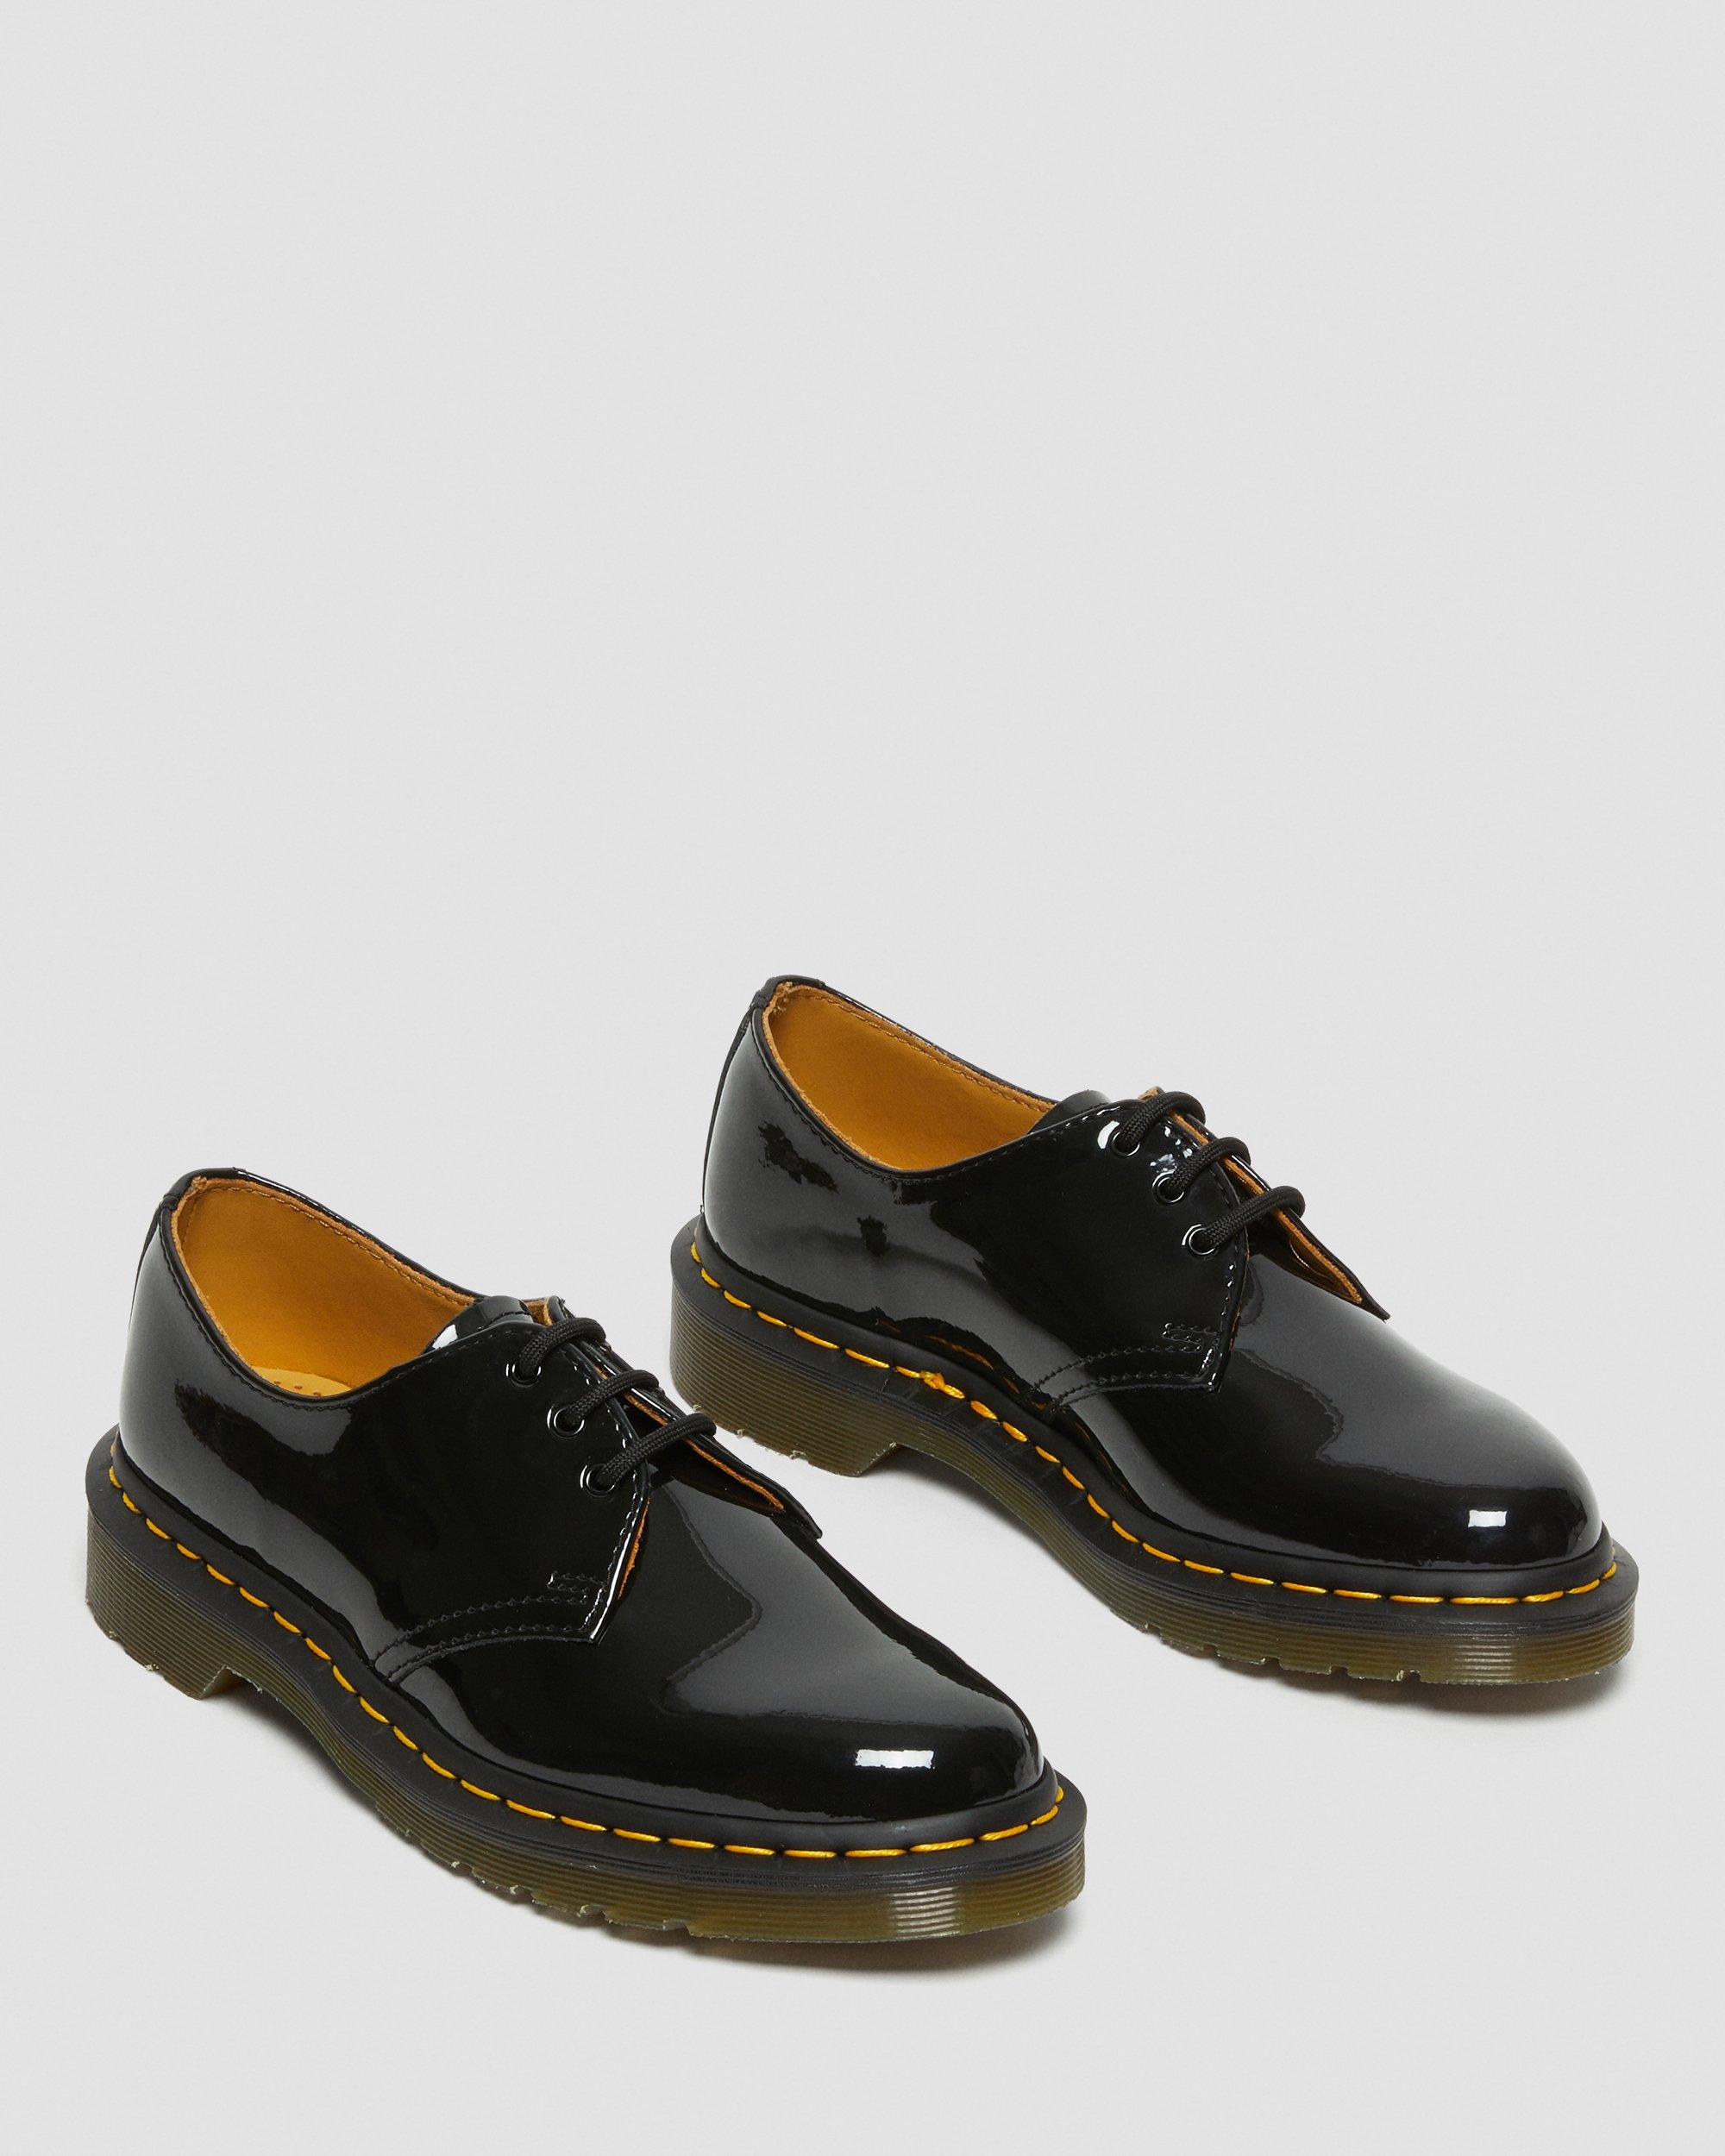 1461 Women's Patent Leather Oxford Shoes in Black